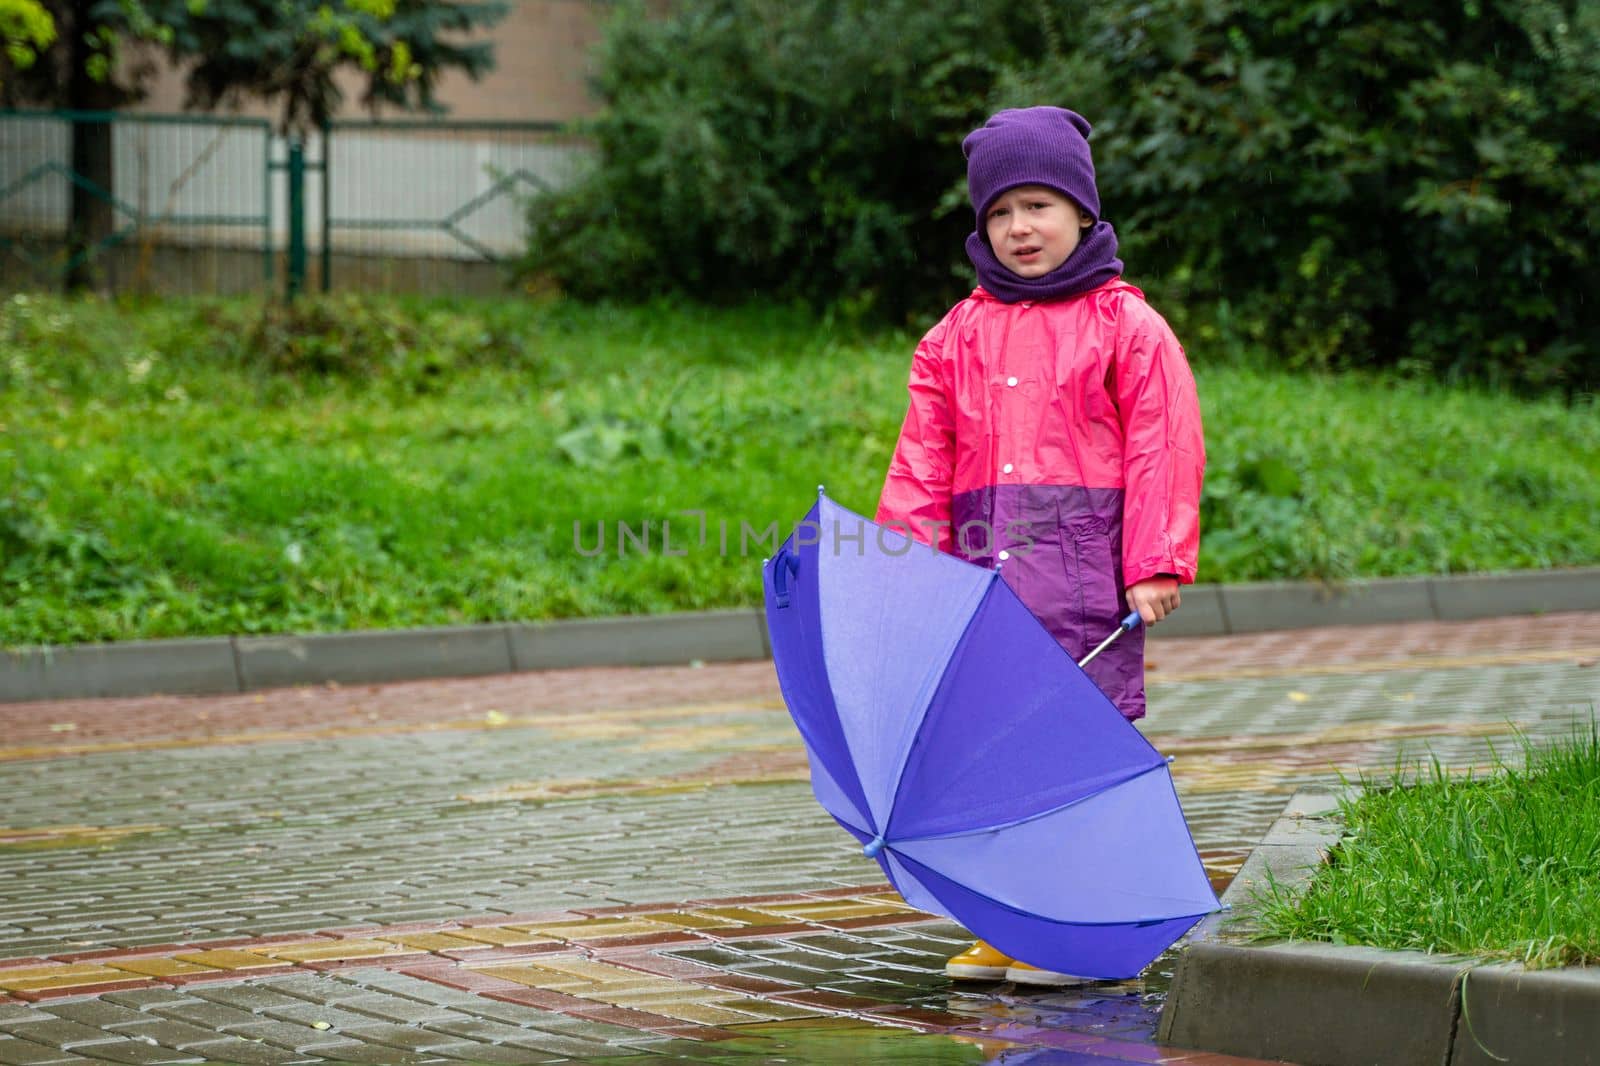 Child with an umbrella walks in the rain. Little boy with umbrella outdoors.